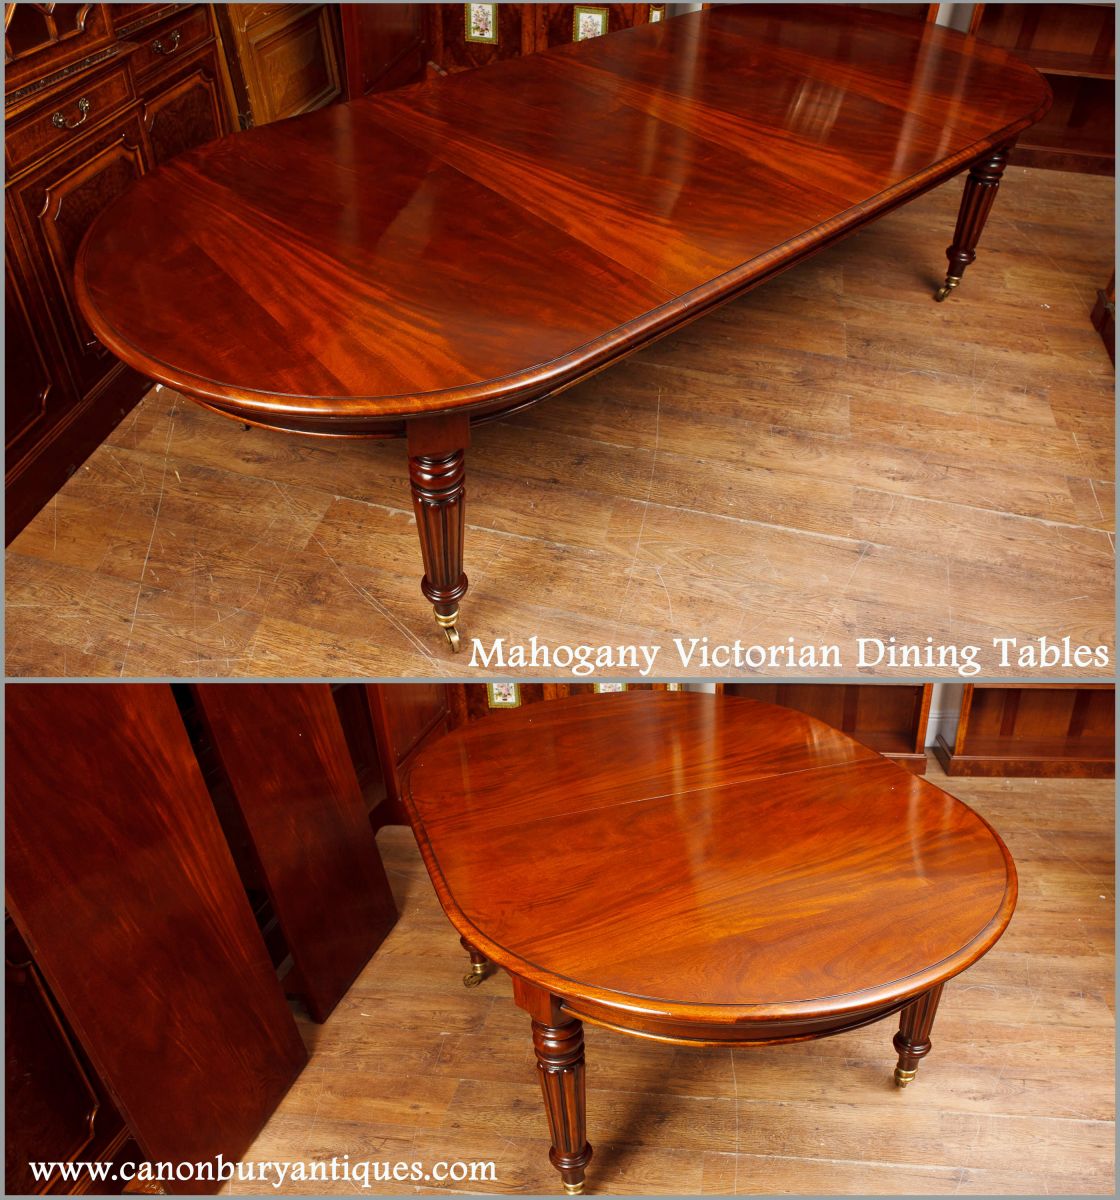 Sumptuous mahogany table for the Victorian Dining Room